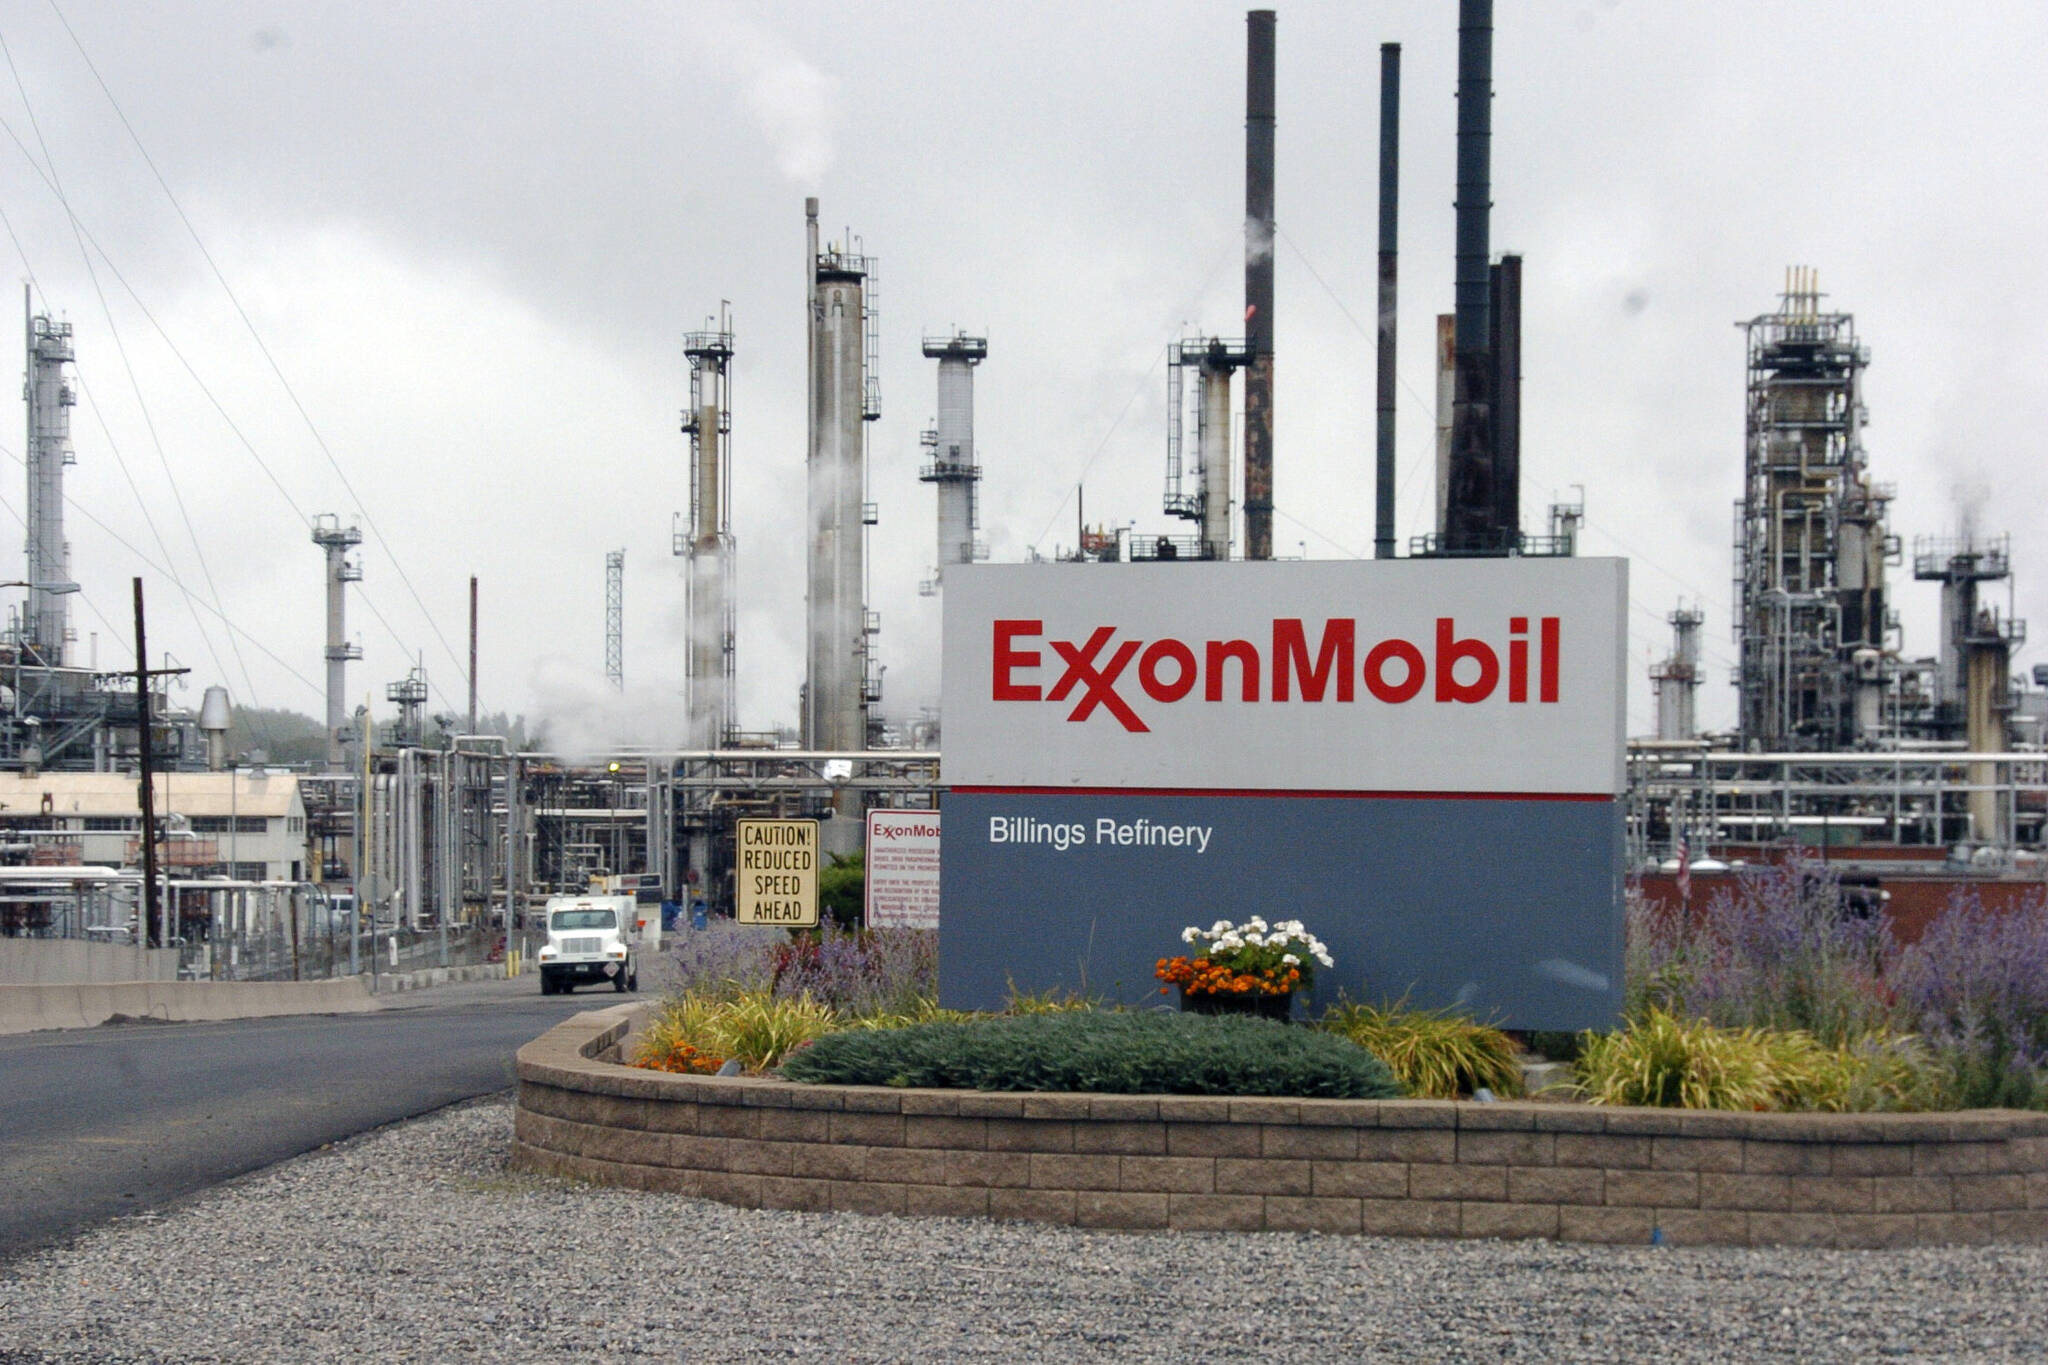 Exxon Mobil Billings Refinery sits in Billings, Mont. Exxon Mobil’s scientists were remarkably accurate in their predictions about global warming, even as the company made public statements that contradicted its own scientists’ conclusions, a new study says. (AP Photo/Matthew Brown, File)